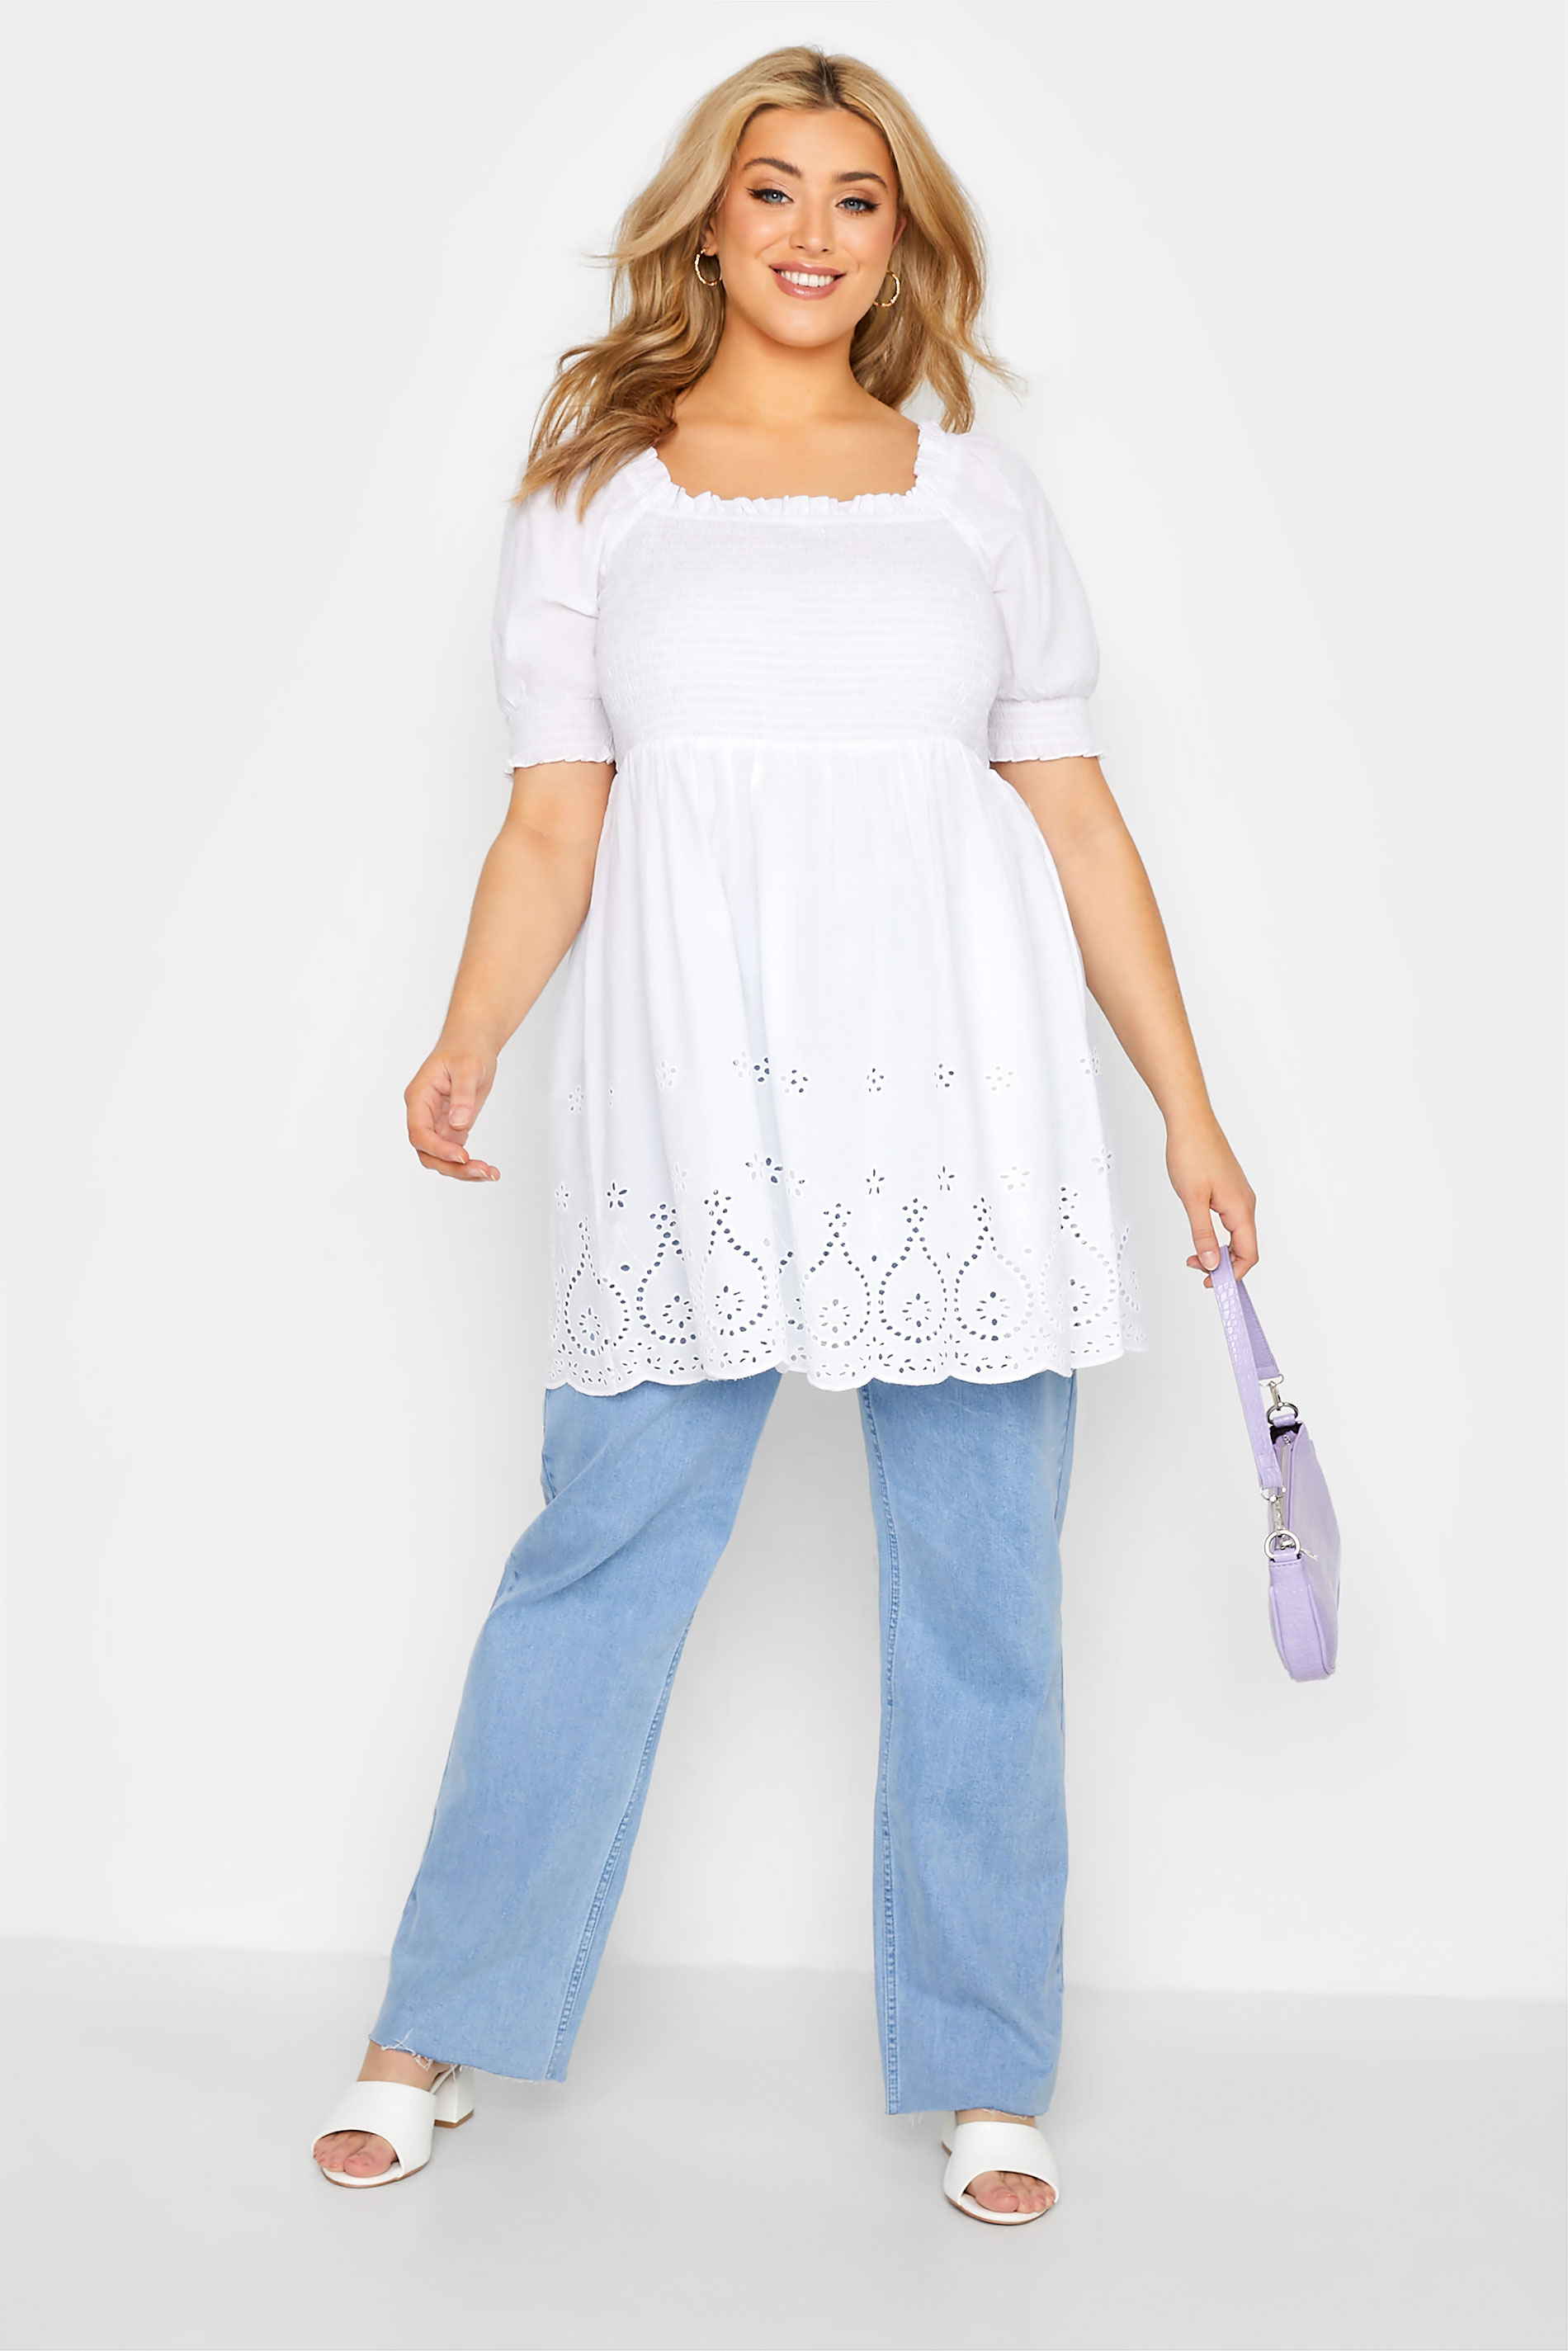 Grande taille  Tops Grande taille  Tops Casual | Top Blanc Broderie Anglaise Manches Courtes - OI76463